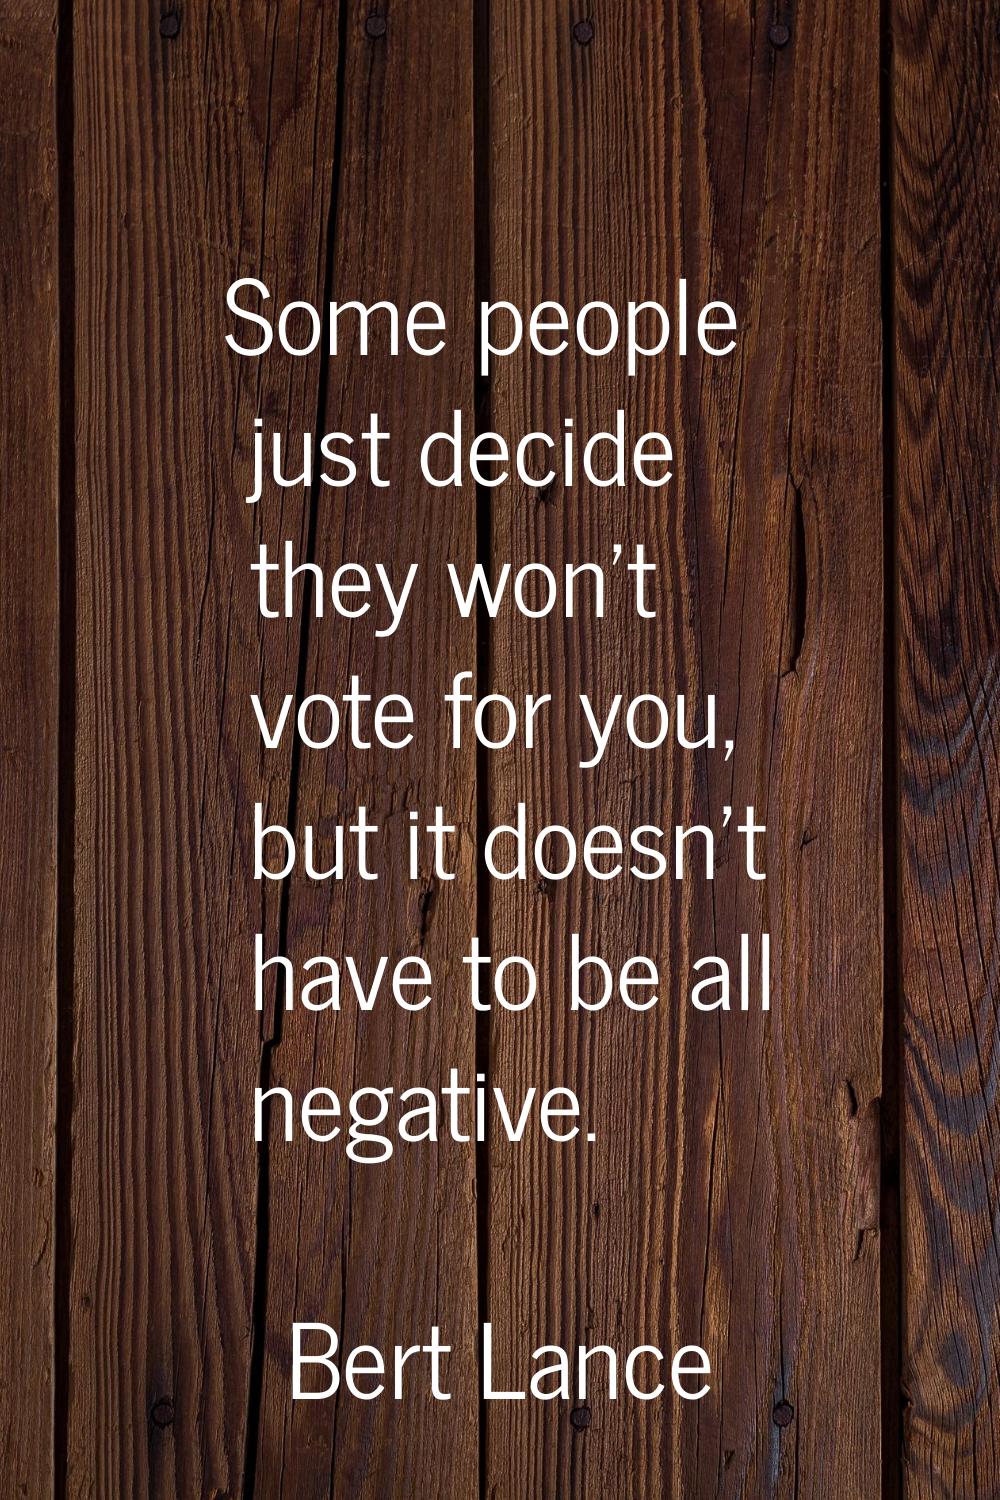 Some people just decide they won't vote for you, but it doesn't have to be all negative.